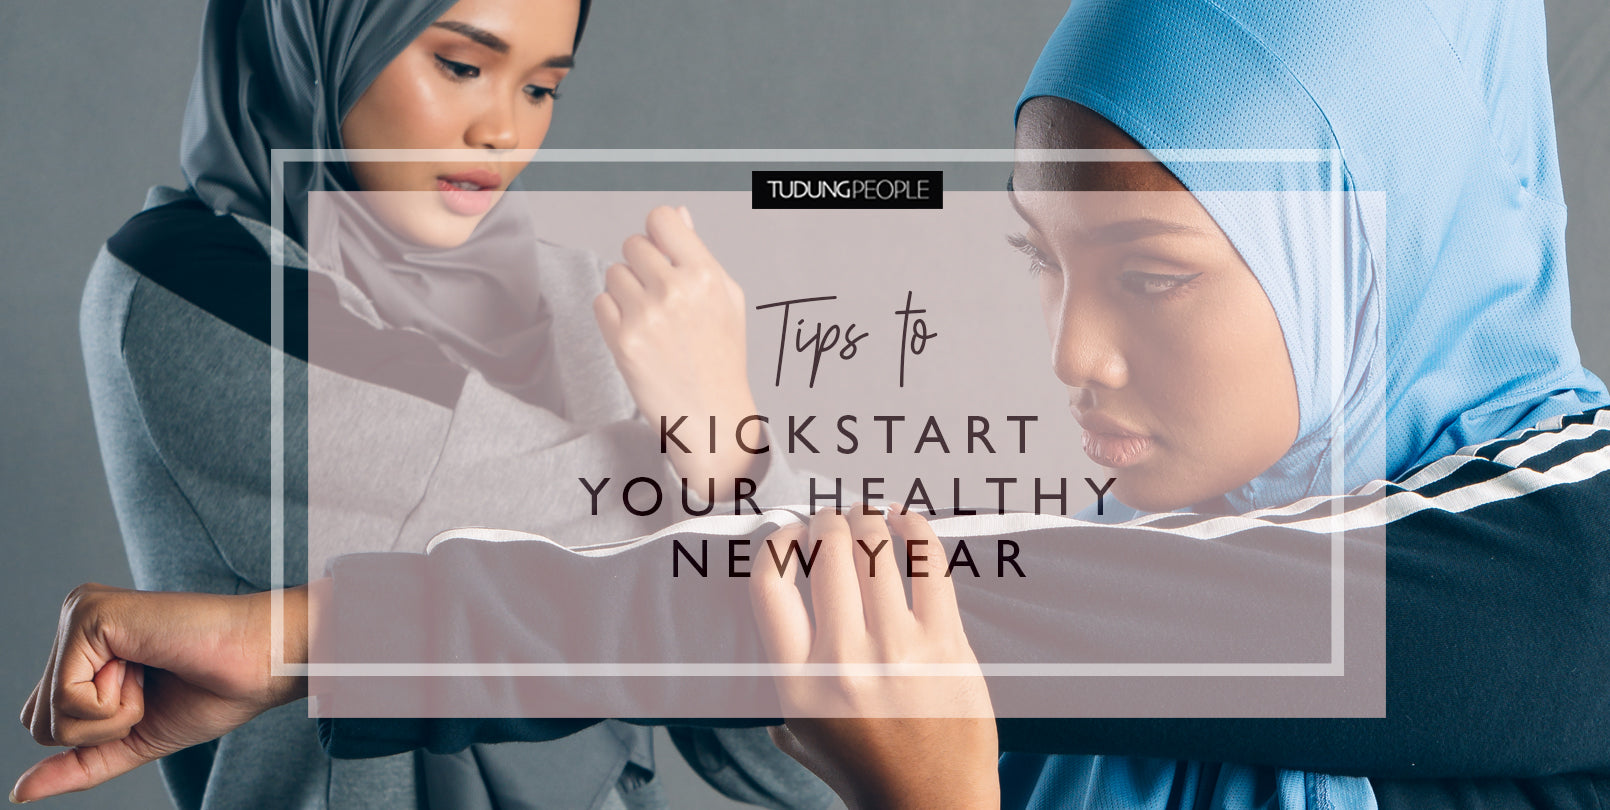 Tips to kickstart your healthy new year